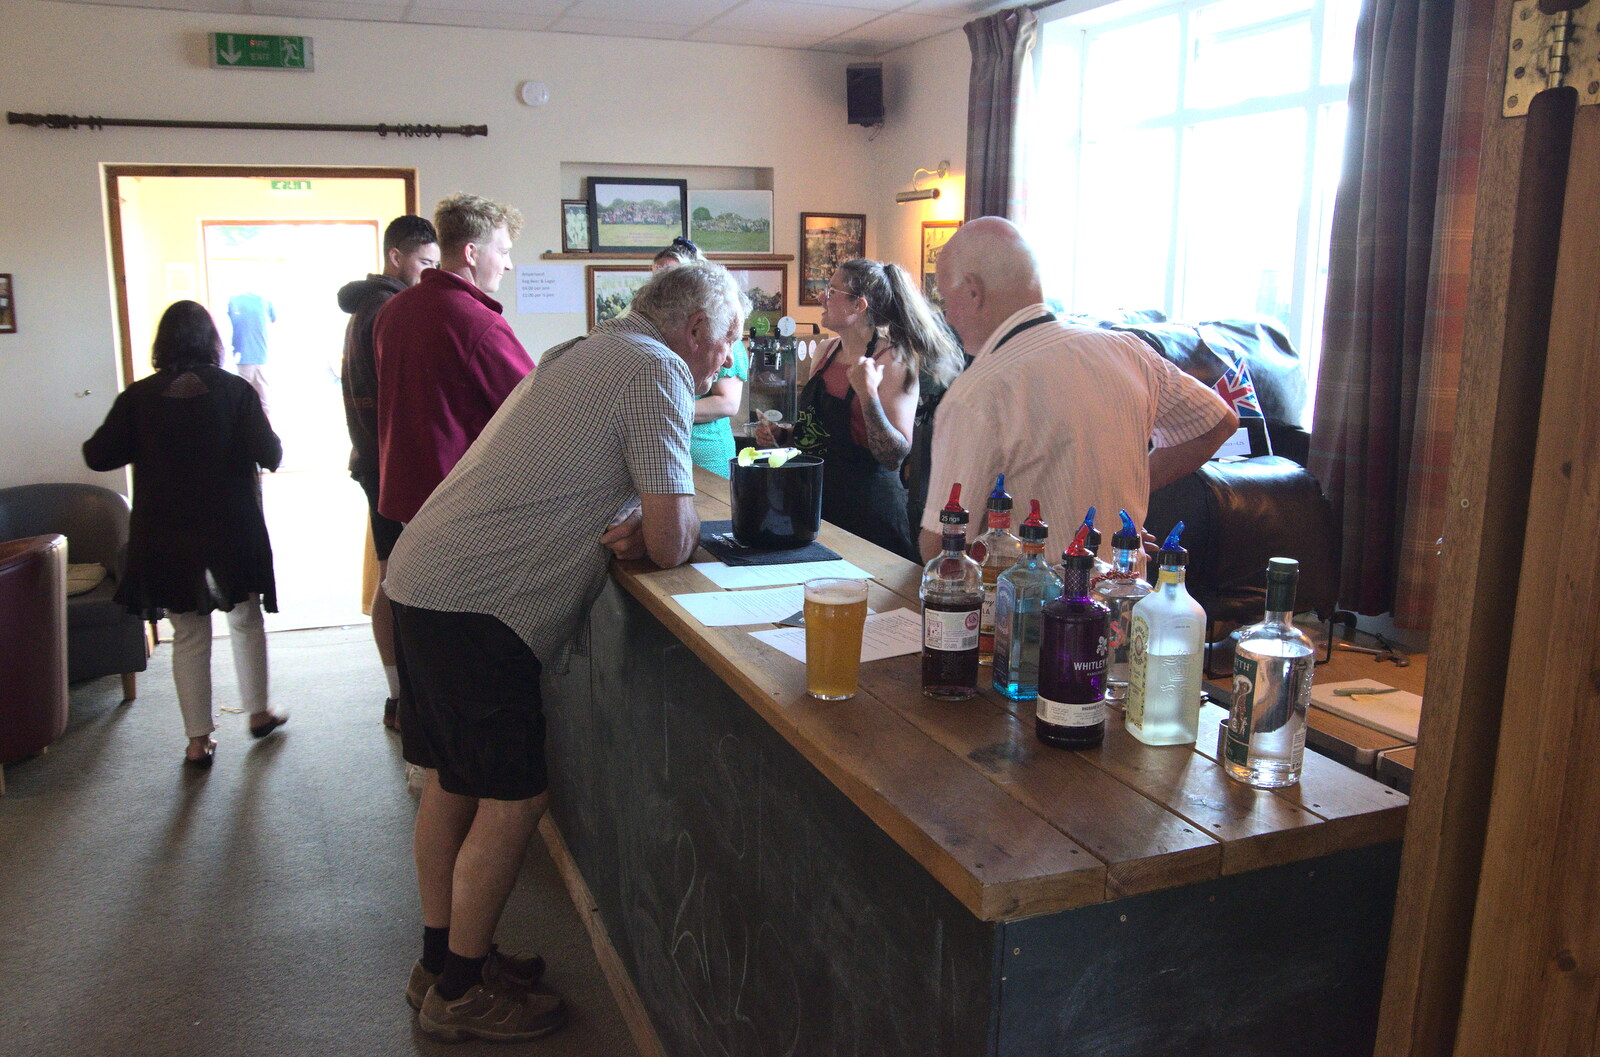 The Denton Beer Festival and a Party, Brockdish, Norfolk - 16th July 2022: The beer-fetival bar